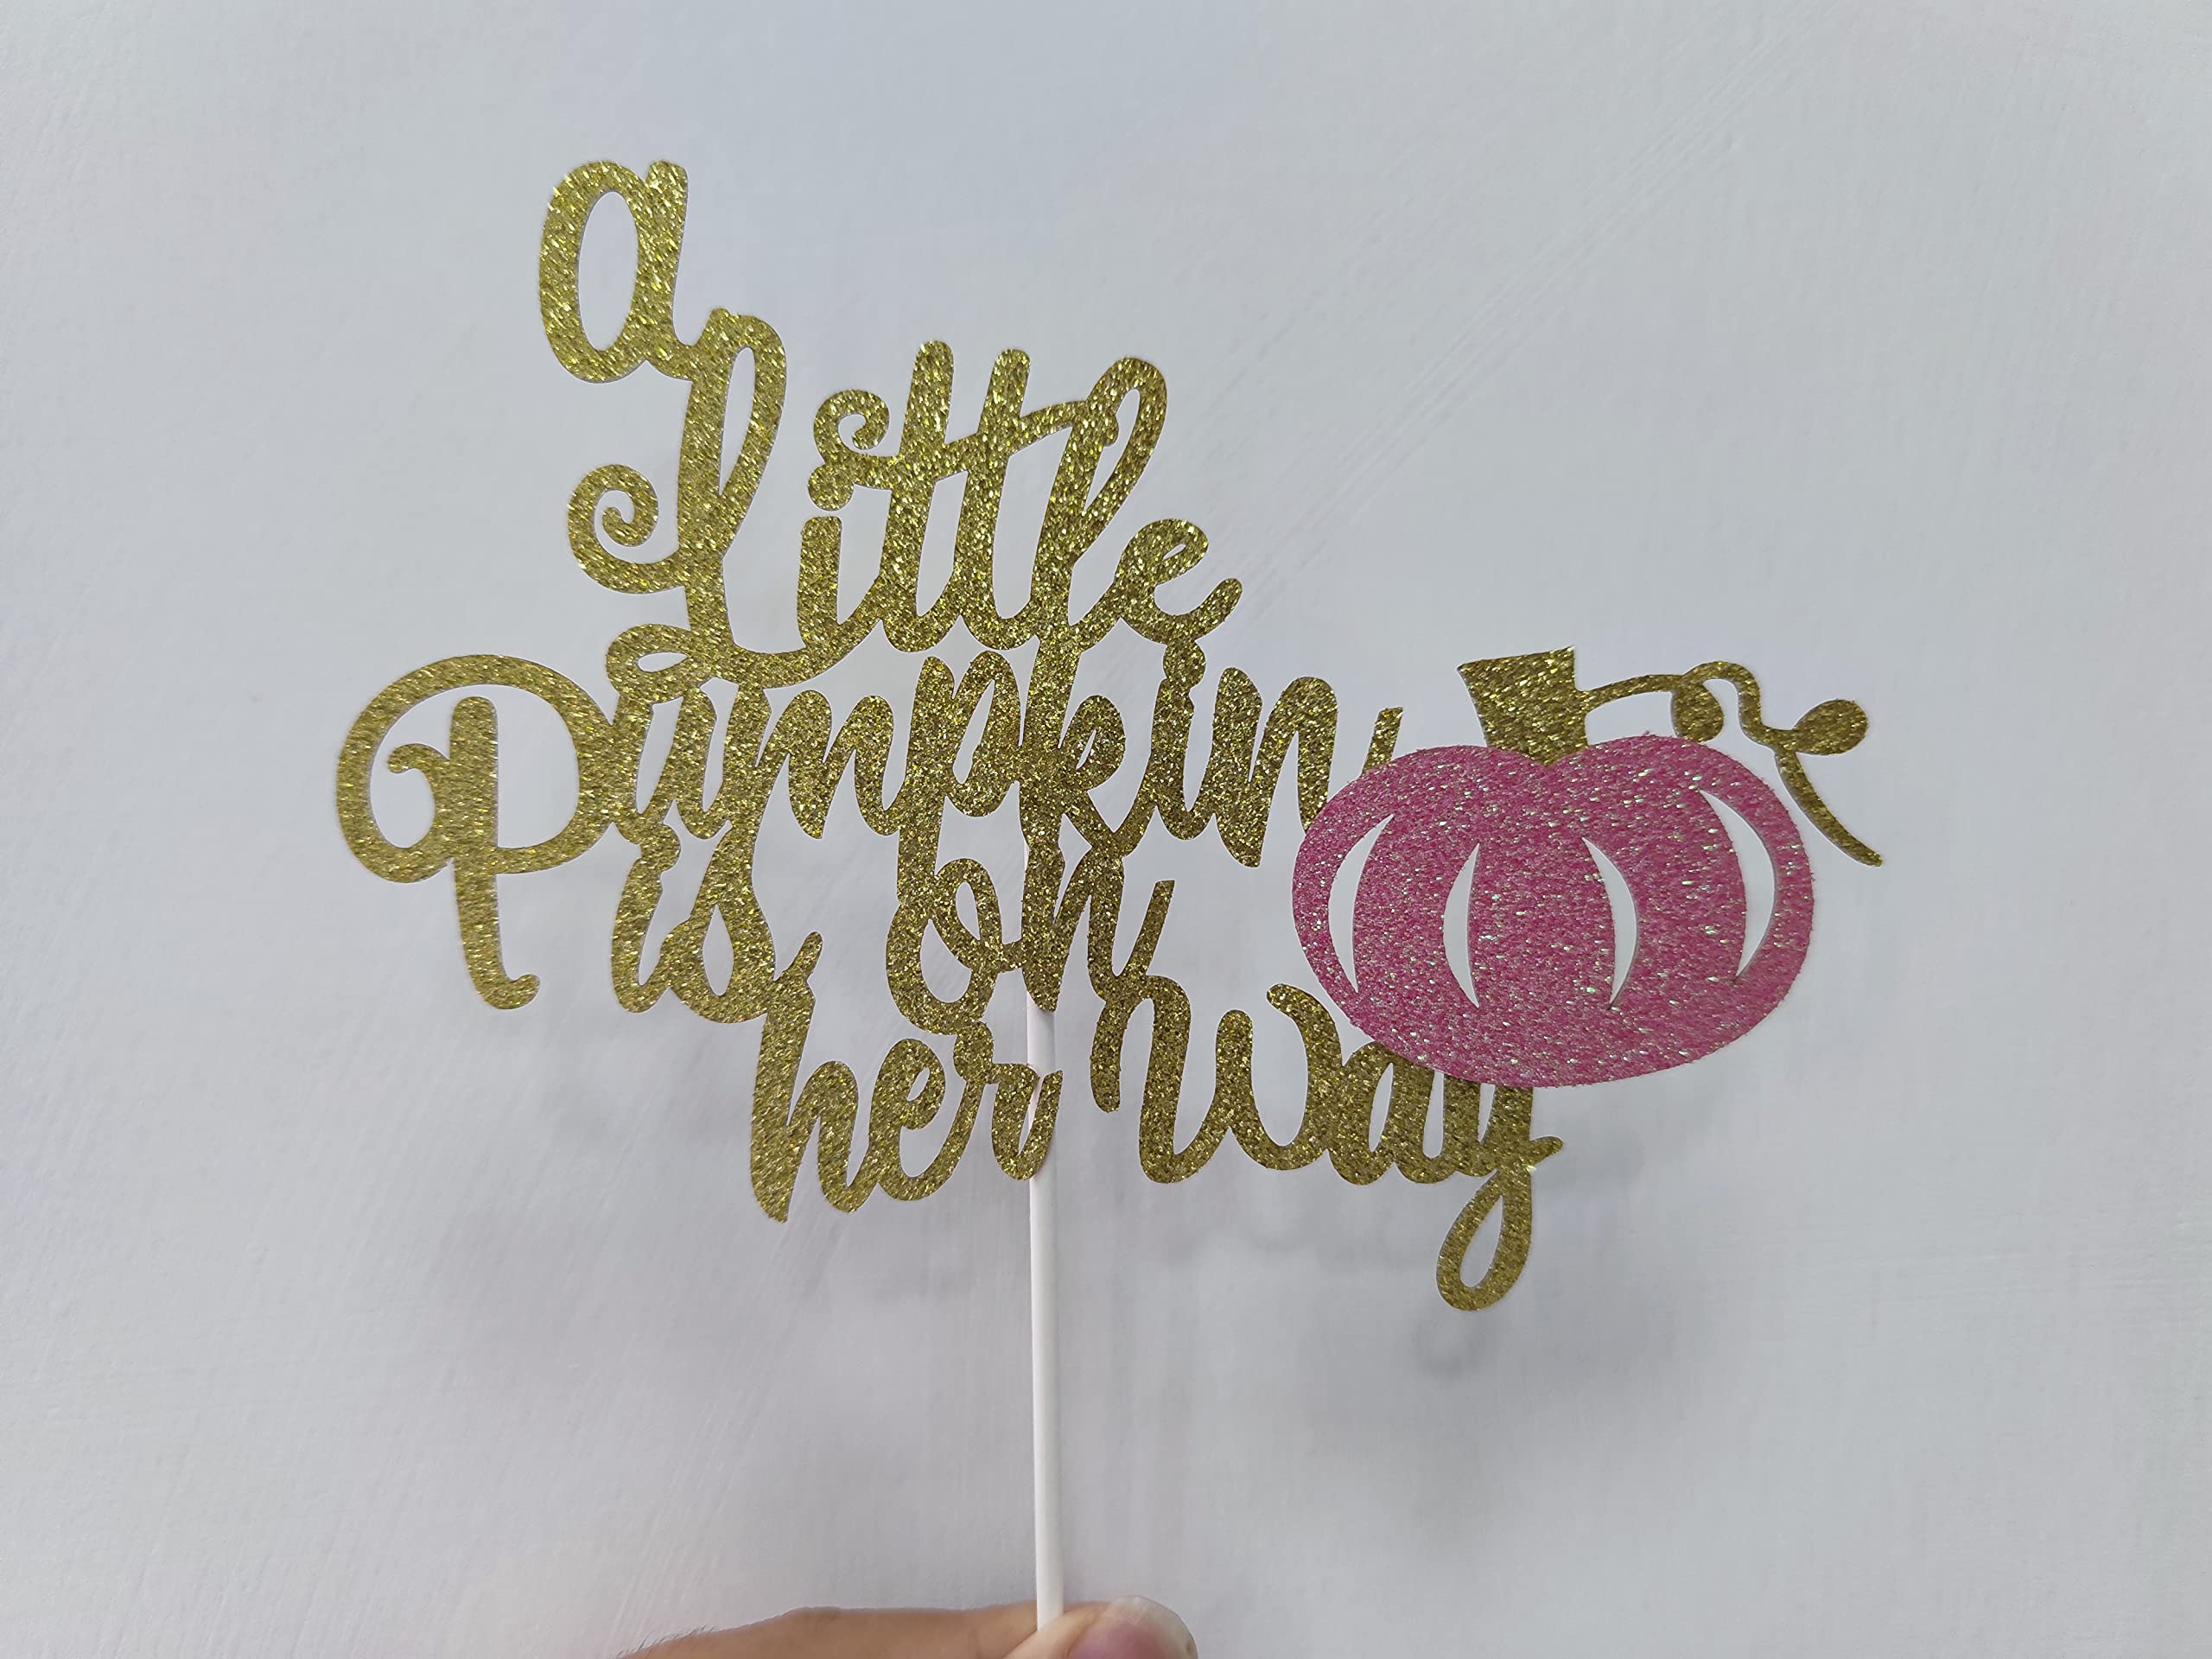 A Little Pumpkin is On Her Way Cake Topper, Little Pumpkin Baby Shower Cake Topper Little Pumpkin Cake Topper Girl for Fall Pumpkin Theme Baby Shower Party Cake Decorations